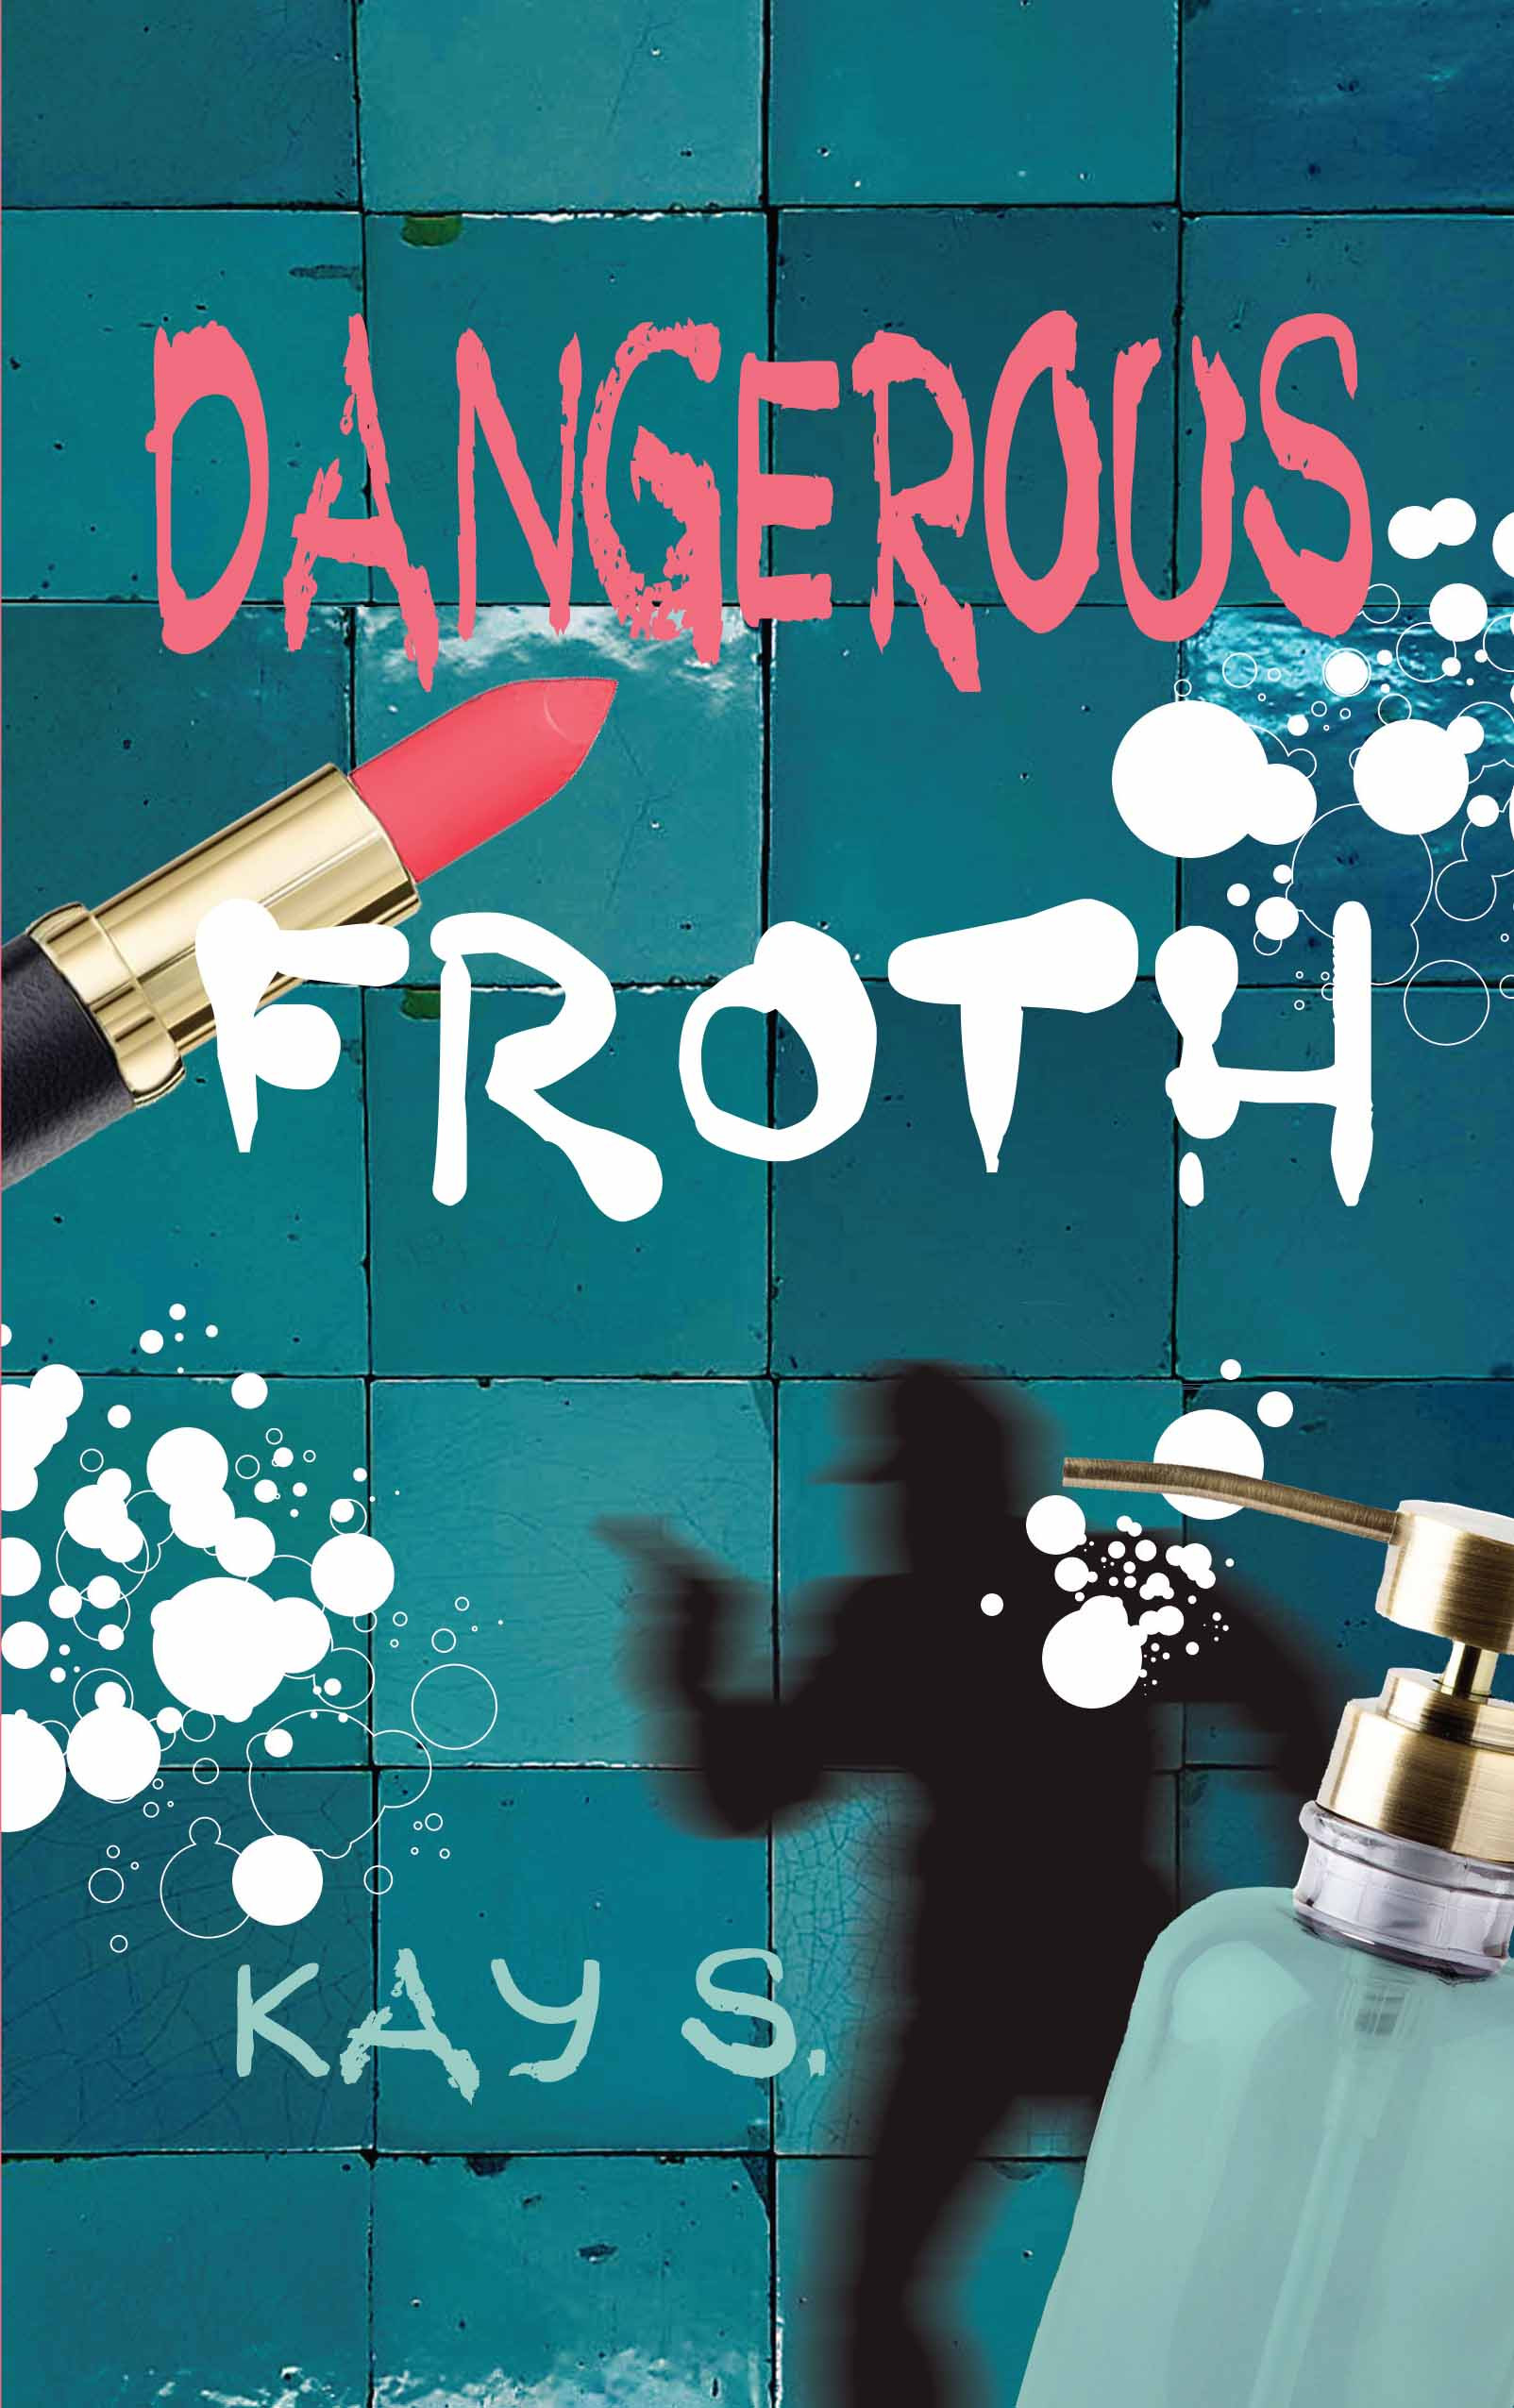 Dangerous Froth (English)